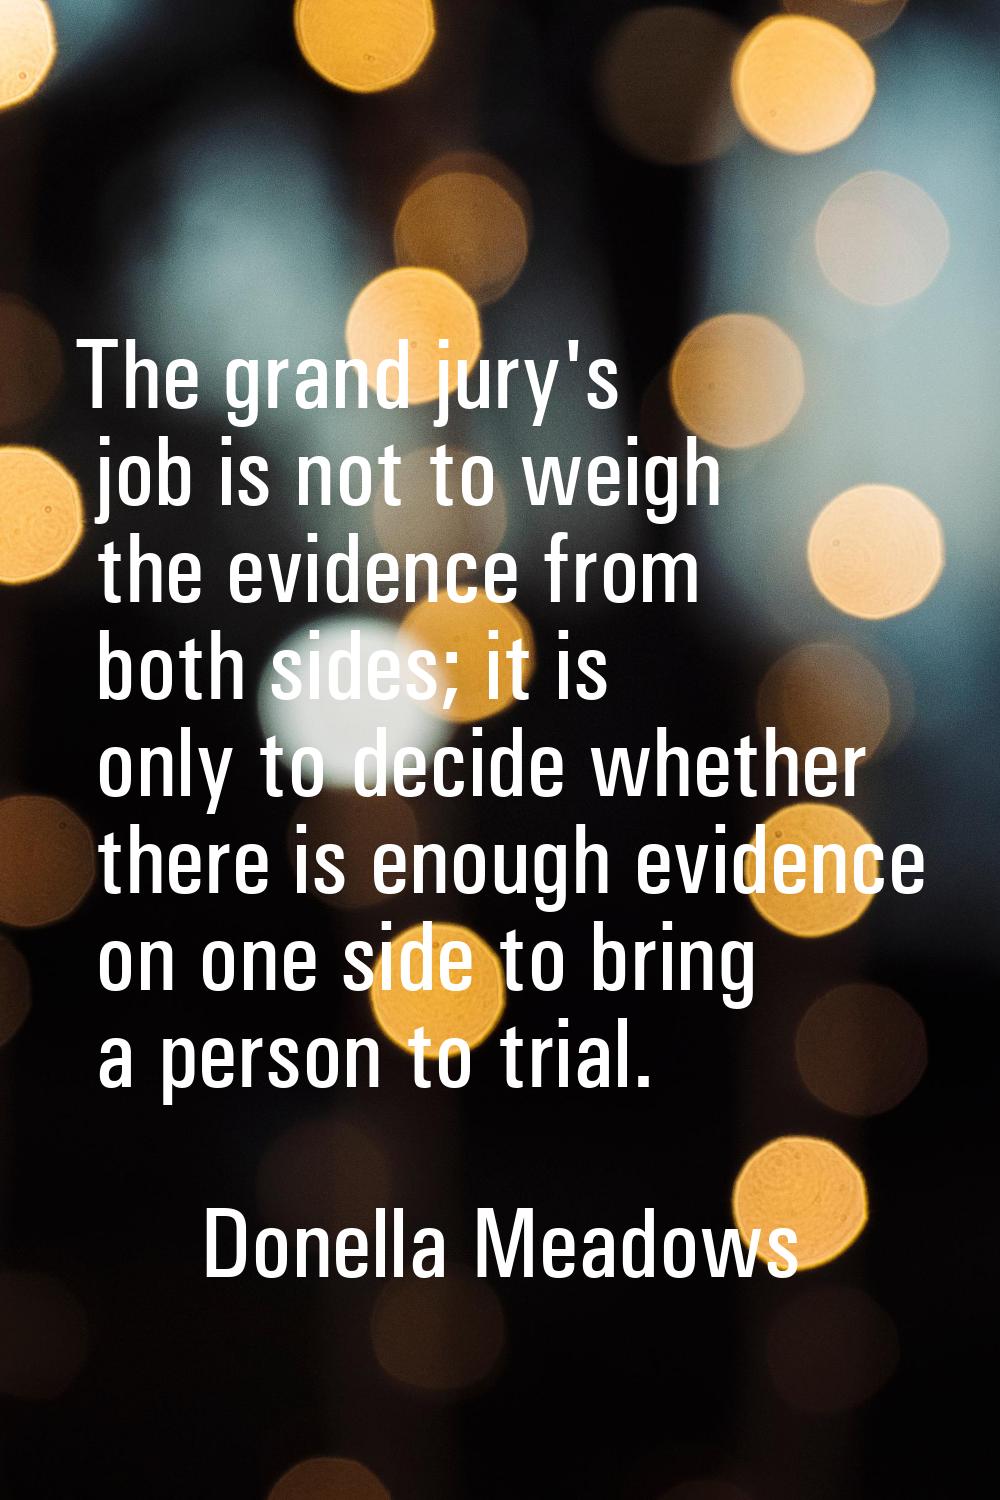 The grand jury's job is not to weigh the evidence from both sides; it is only to decide whether the